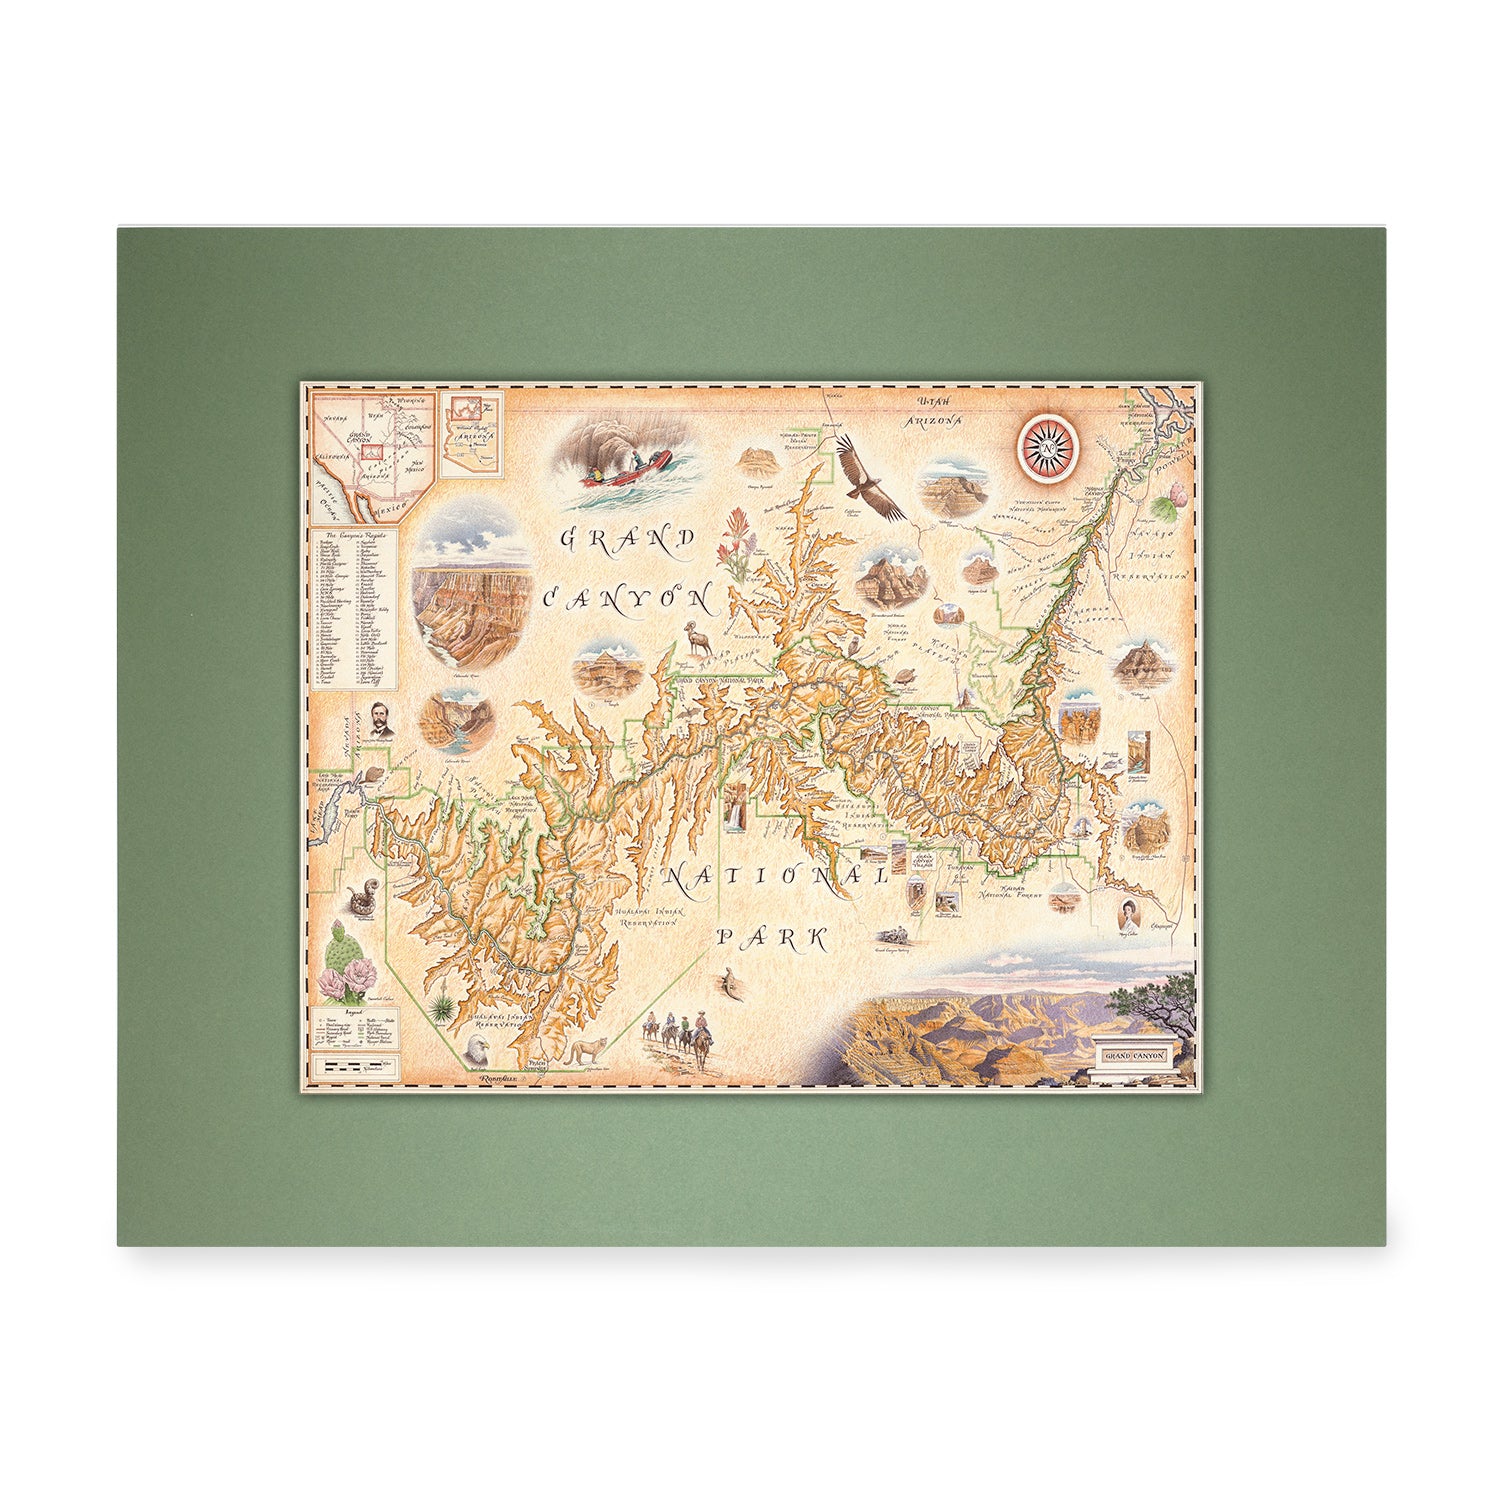 Grand Canyon National Park Mini-Map by Xplorer Maps in earth tones of beige, brown, and orange. Located in Arizona, just south of Utah and eastern Nevada. The map features illustrations of activities like whitewater rafting and mule riding, along tortoise, California Condor, and Beavertail Cactus. 